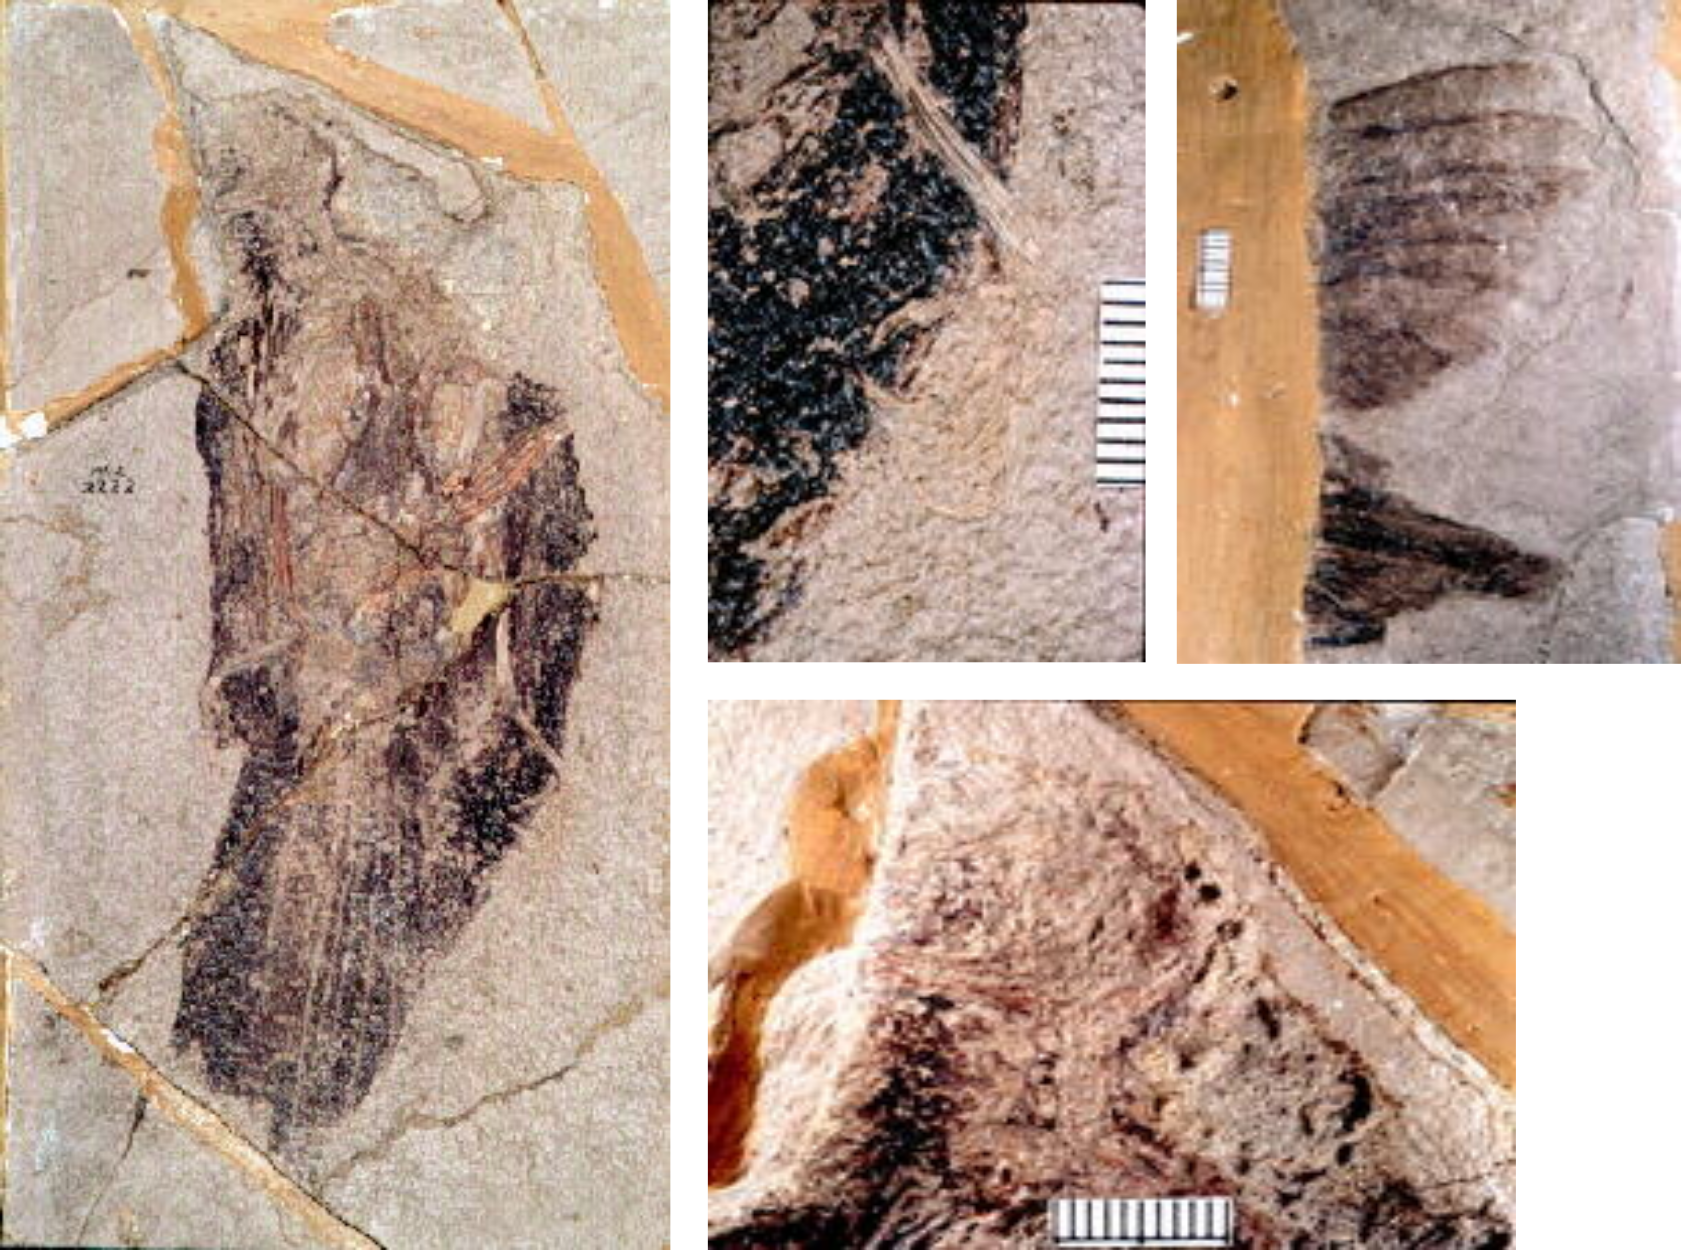 In a tan layered rock, a dark brown carbonized remain of a small bird is shown. There are other photographs that show a closer view of details in the bird fossil such as bone and feather details.